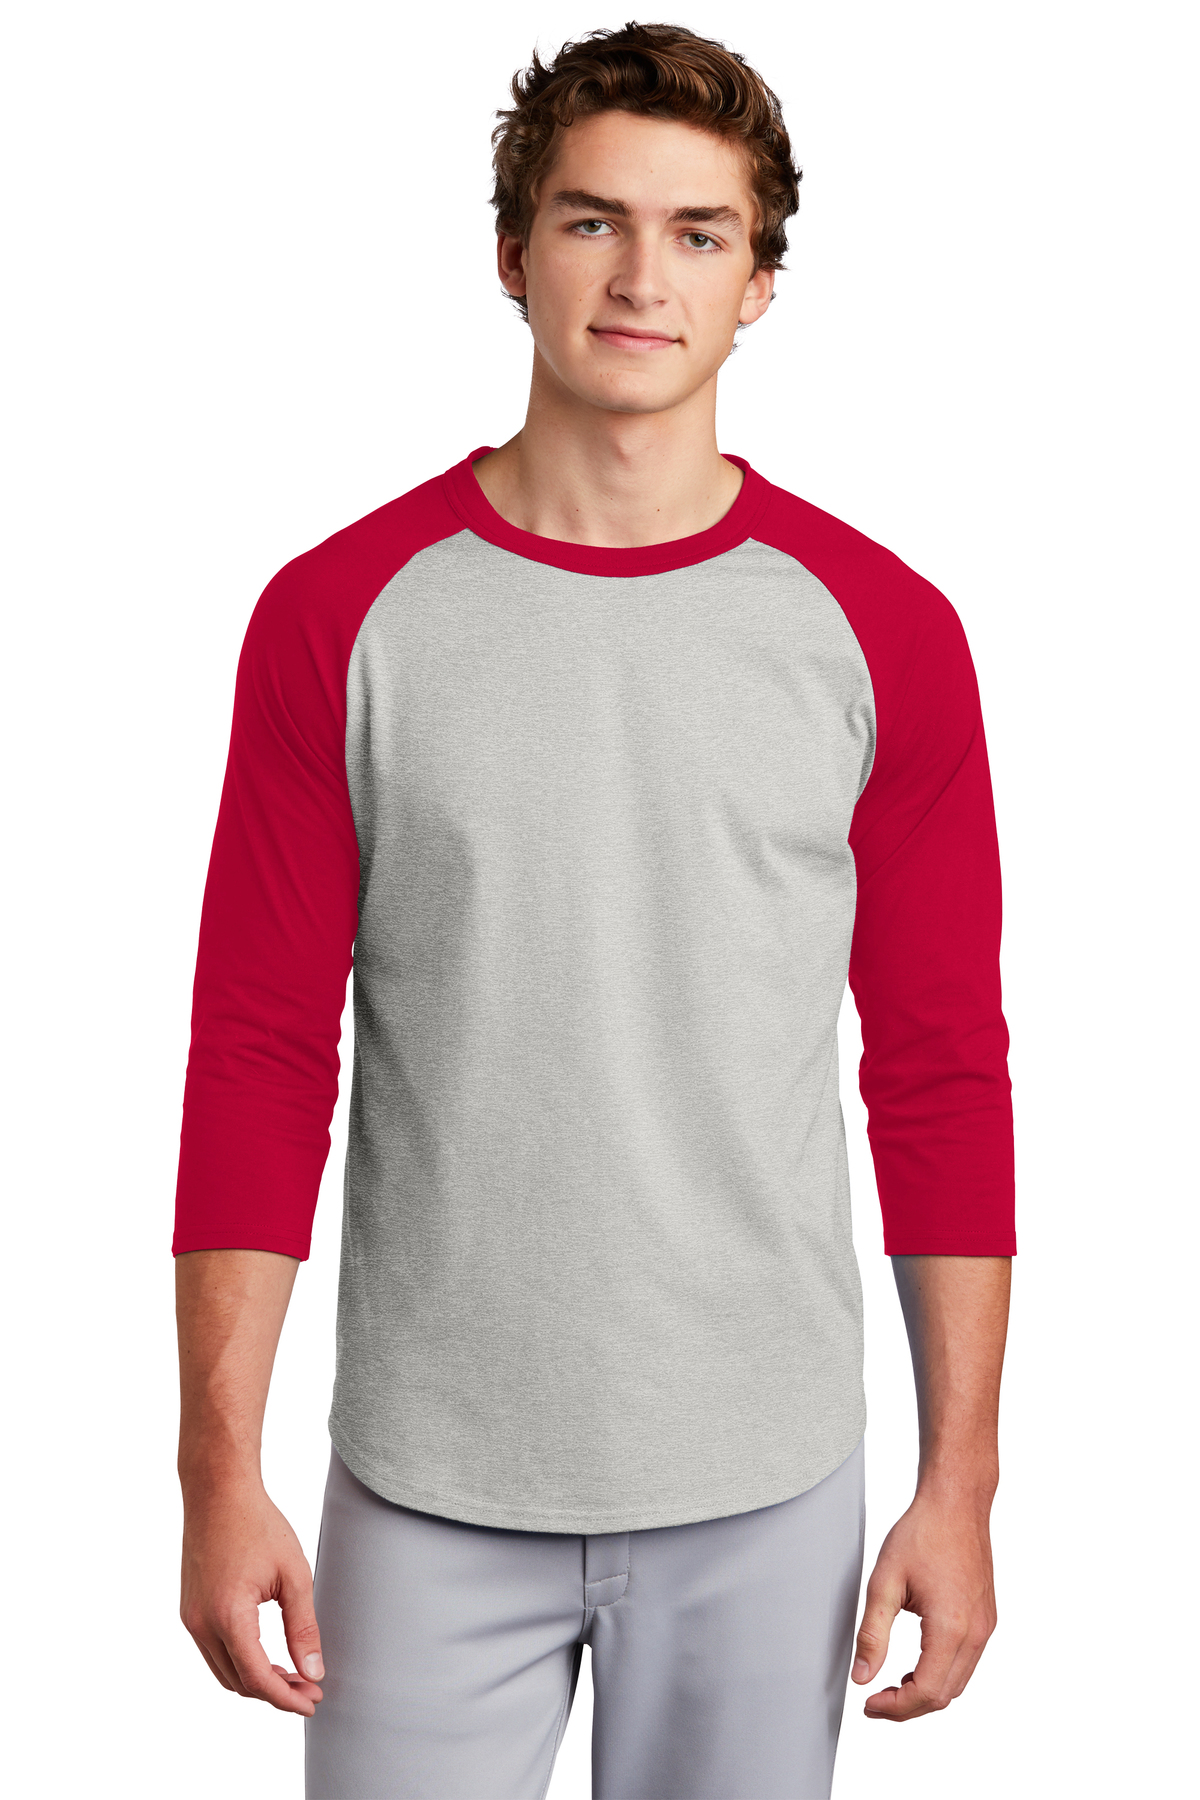 click to view Heather Grey/ Red